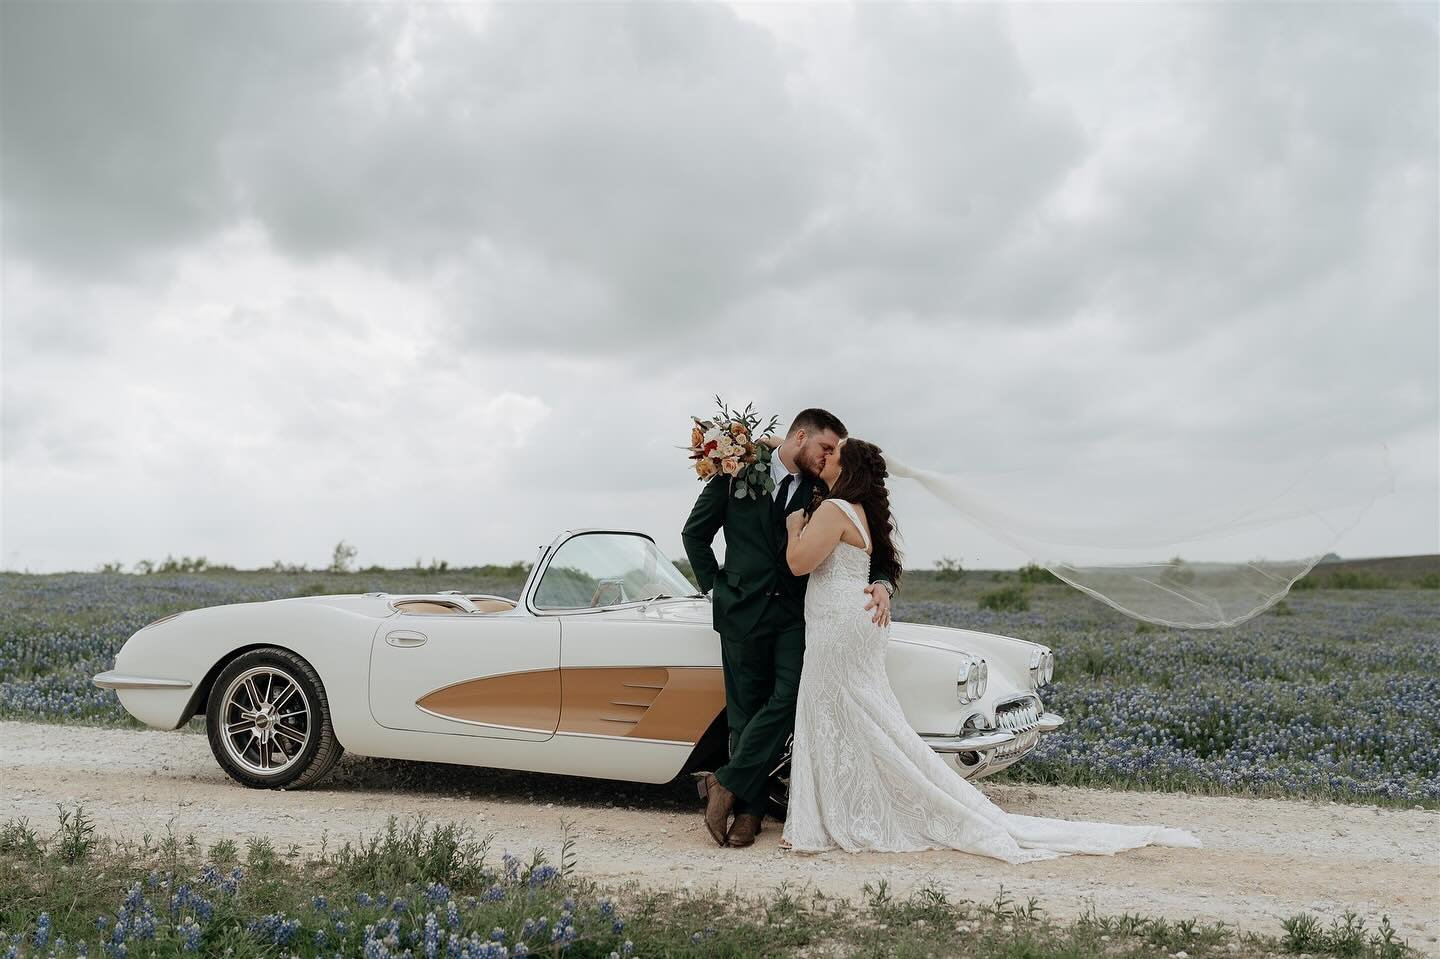 Is it fast enough so we can fly away? 🤍

Photography: @madelinefrostphotography 
Videography: @jcfilmgroup 
Coordination: @eventsofnv 
HMU: @southern.tease 
Florals: @suebeevintage 

#justmarried #newlyweds #mrandmrs #bride #groom #getawaycar #corve